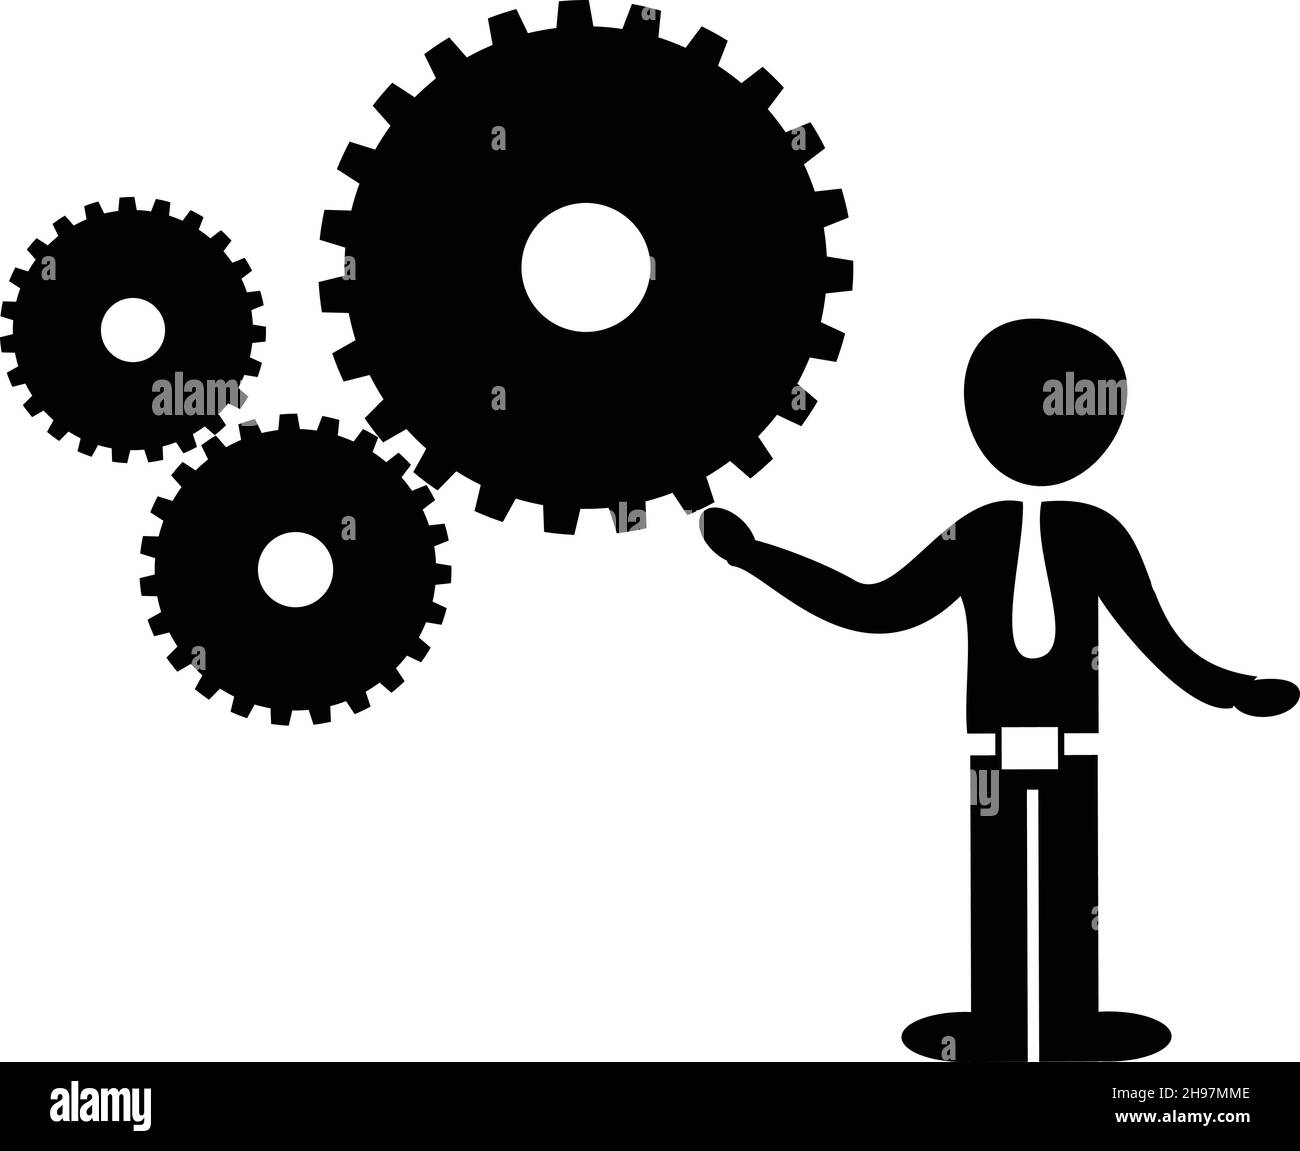 Man rotating industrial gears vector illustration. Black silhouettes isolated over white background Stock Vector